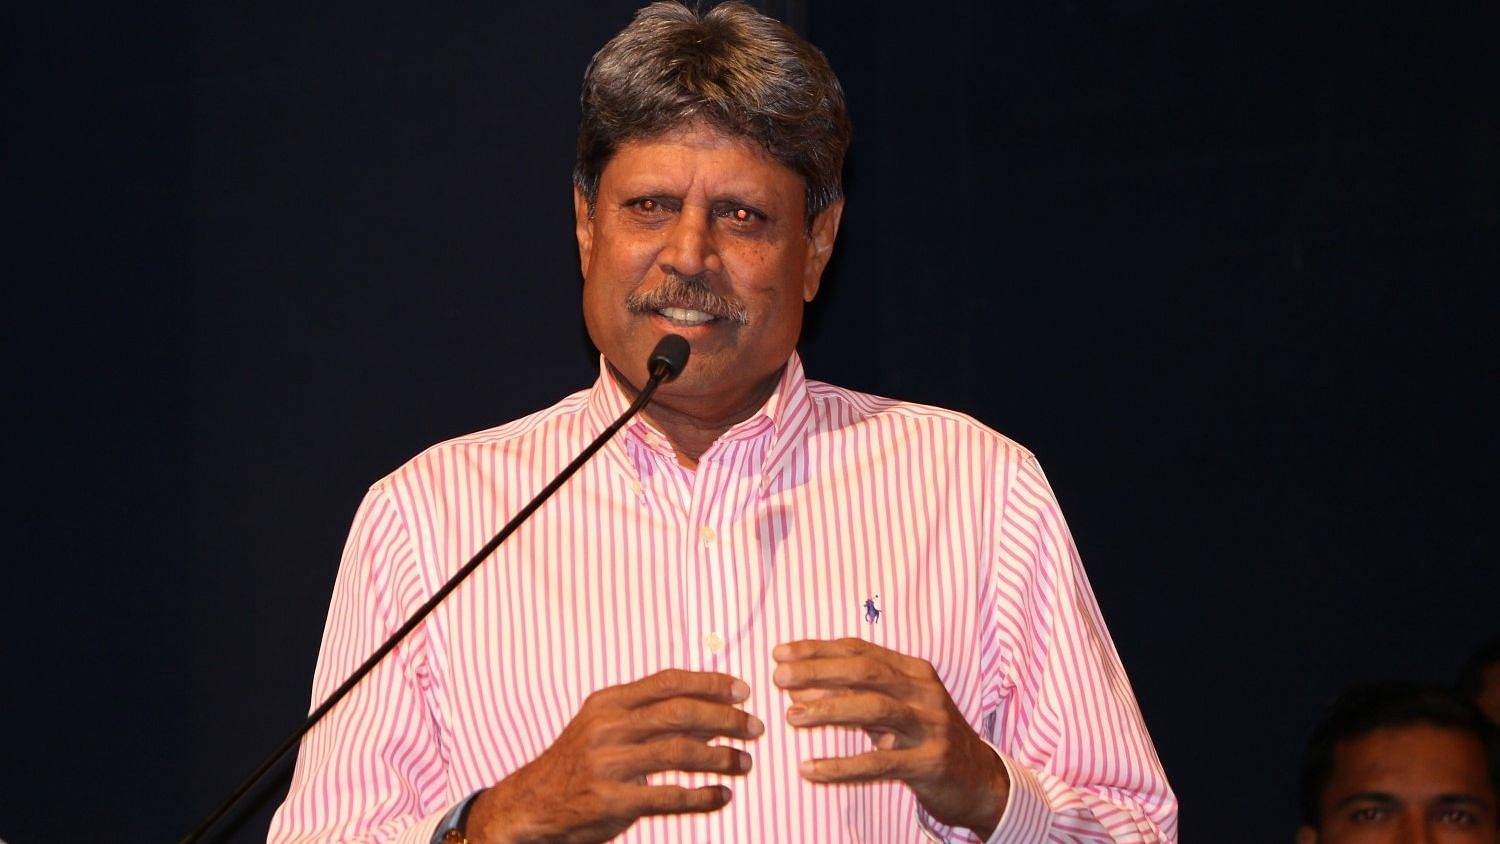 Legendary Kapil Dev recalls his “35-year long association” with one of his closest friends and former Australian cricketer Dean Jones.